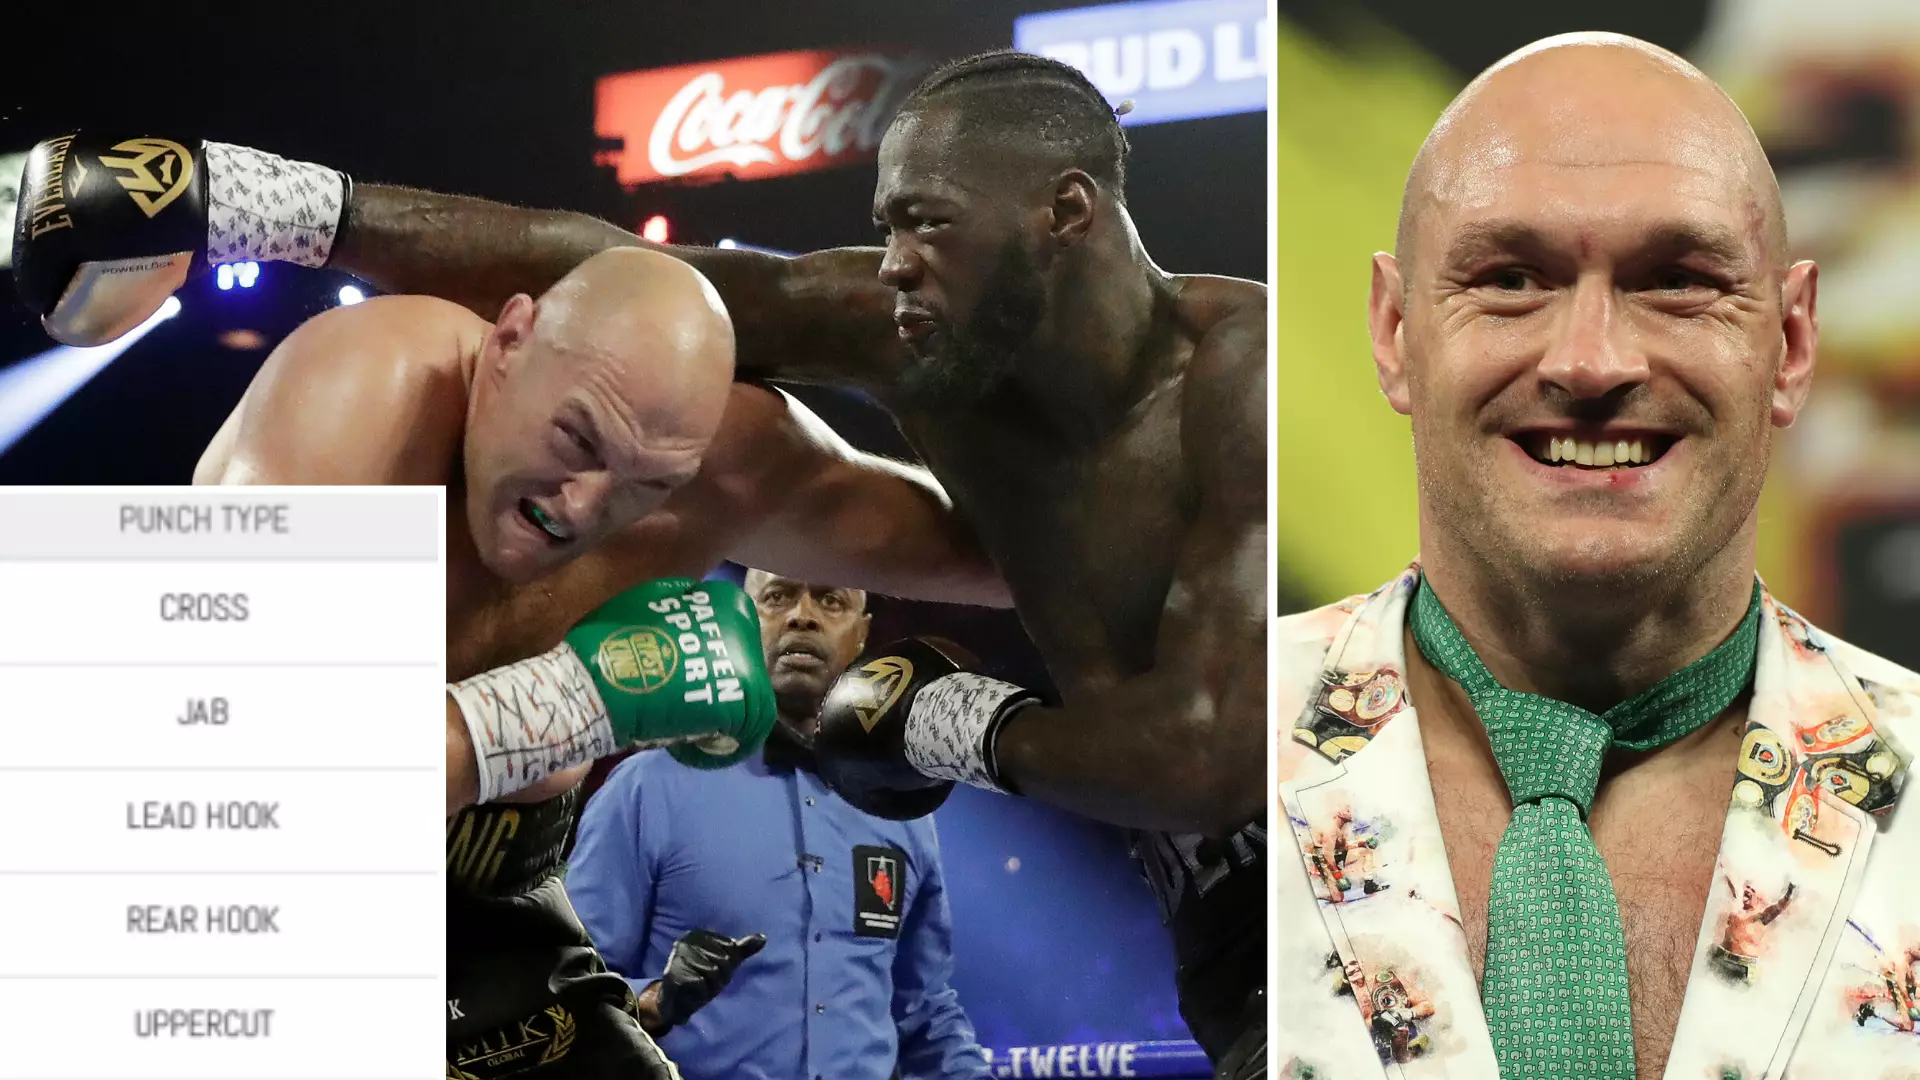 Tyson Fury Vs Deontay Wilder: In-Depth Analysis Of Punches Shows How Badly Fury Dominated